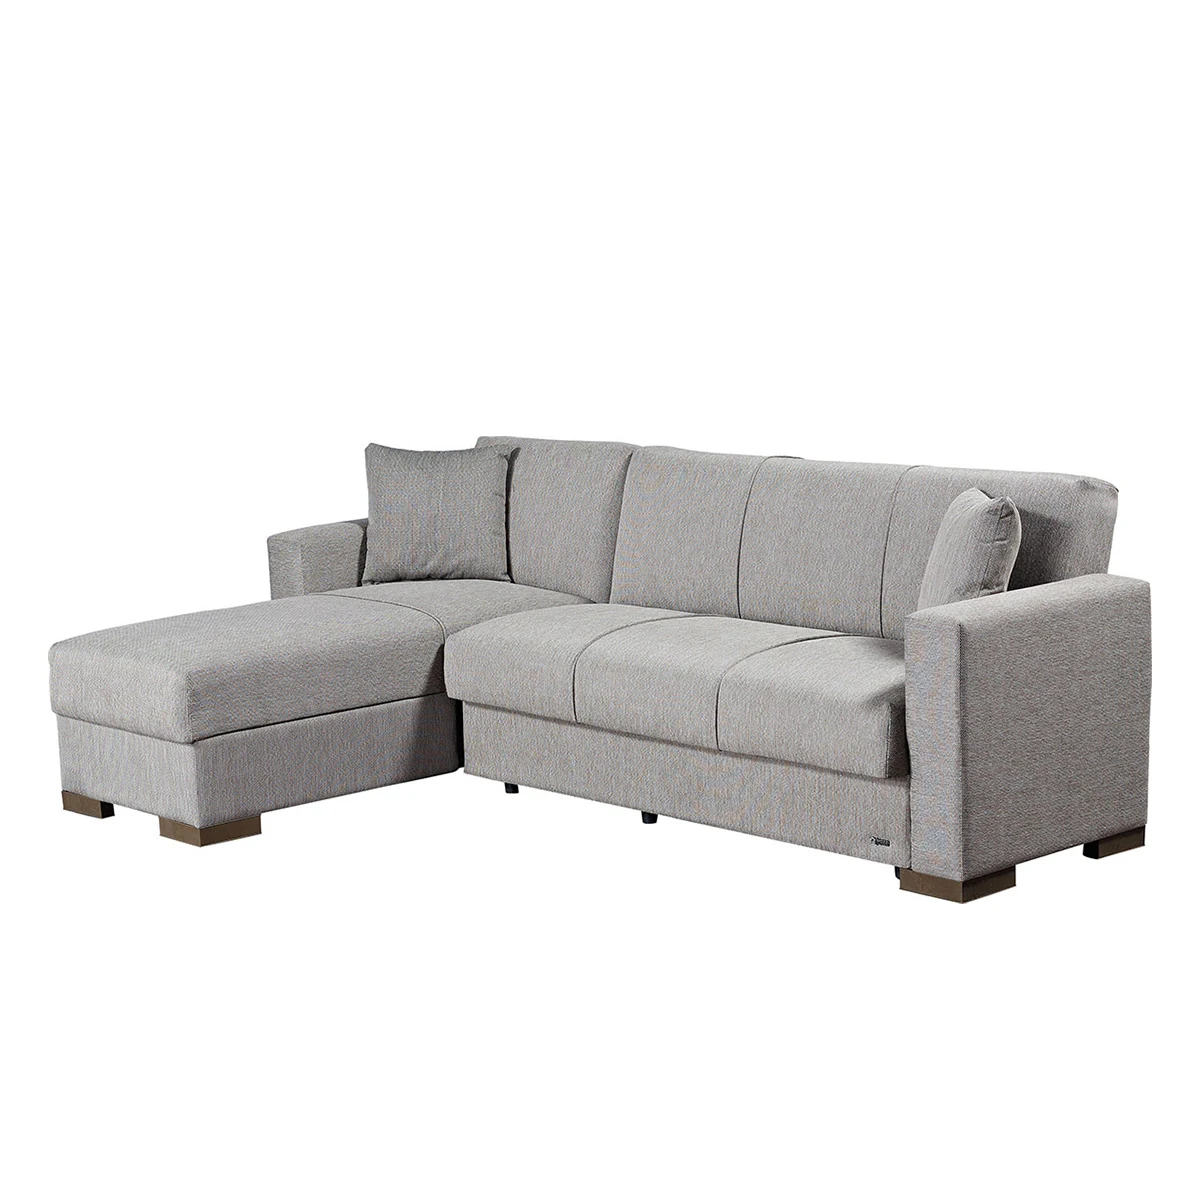 Corner Sectional Sofa Cheap Price Convertible Sofas Economical Hotel And Lobby Elegance Style Turkish New Style Sofa